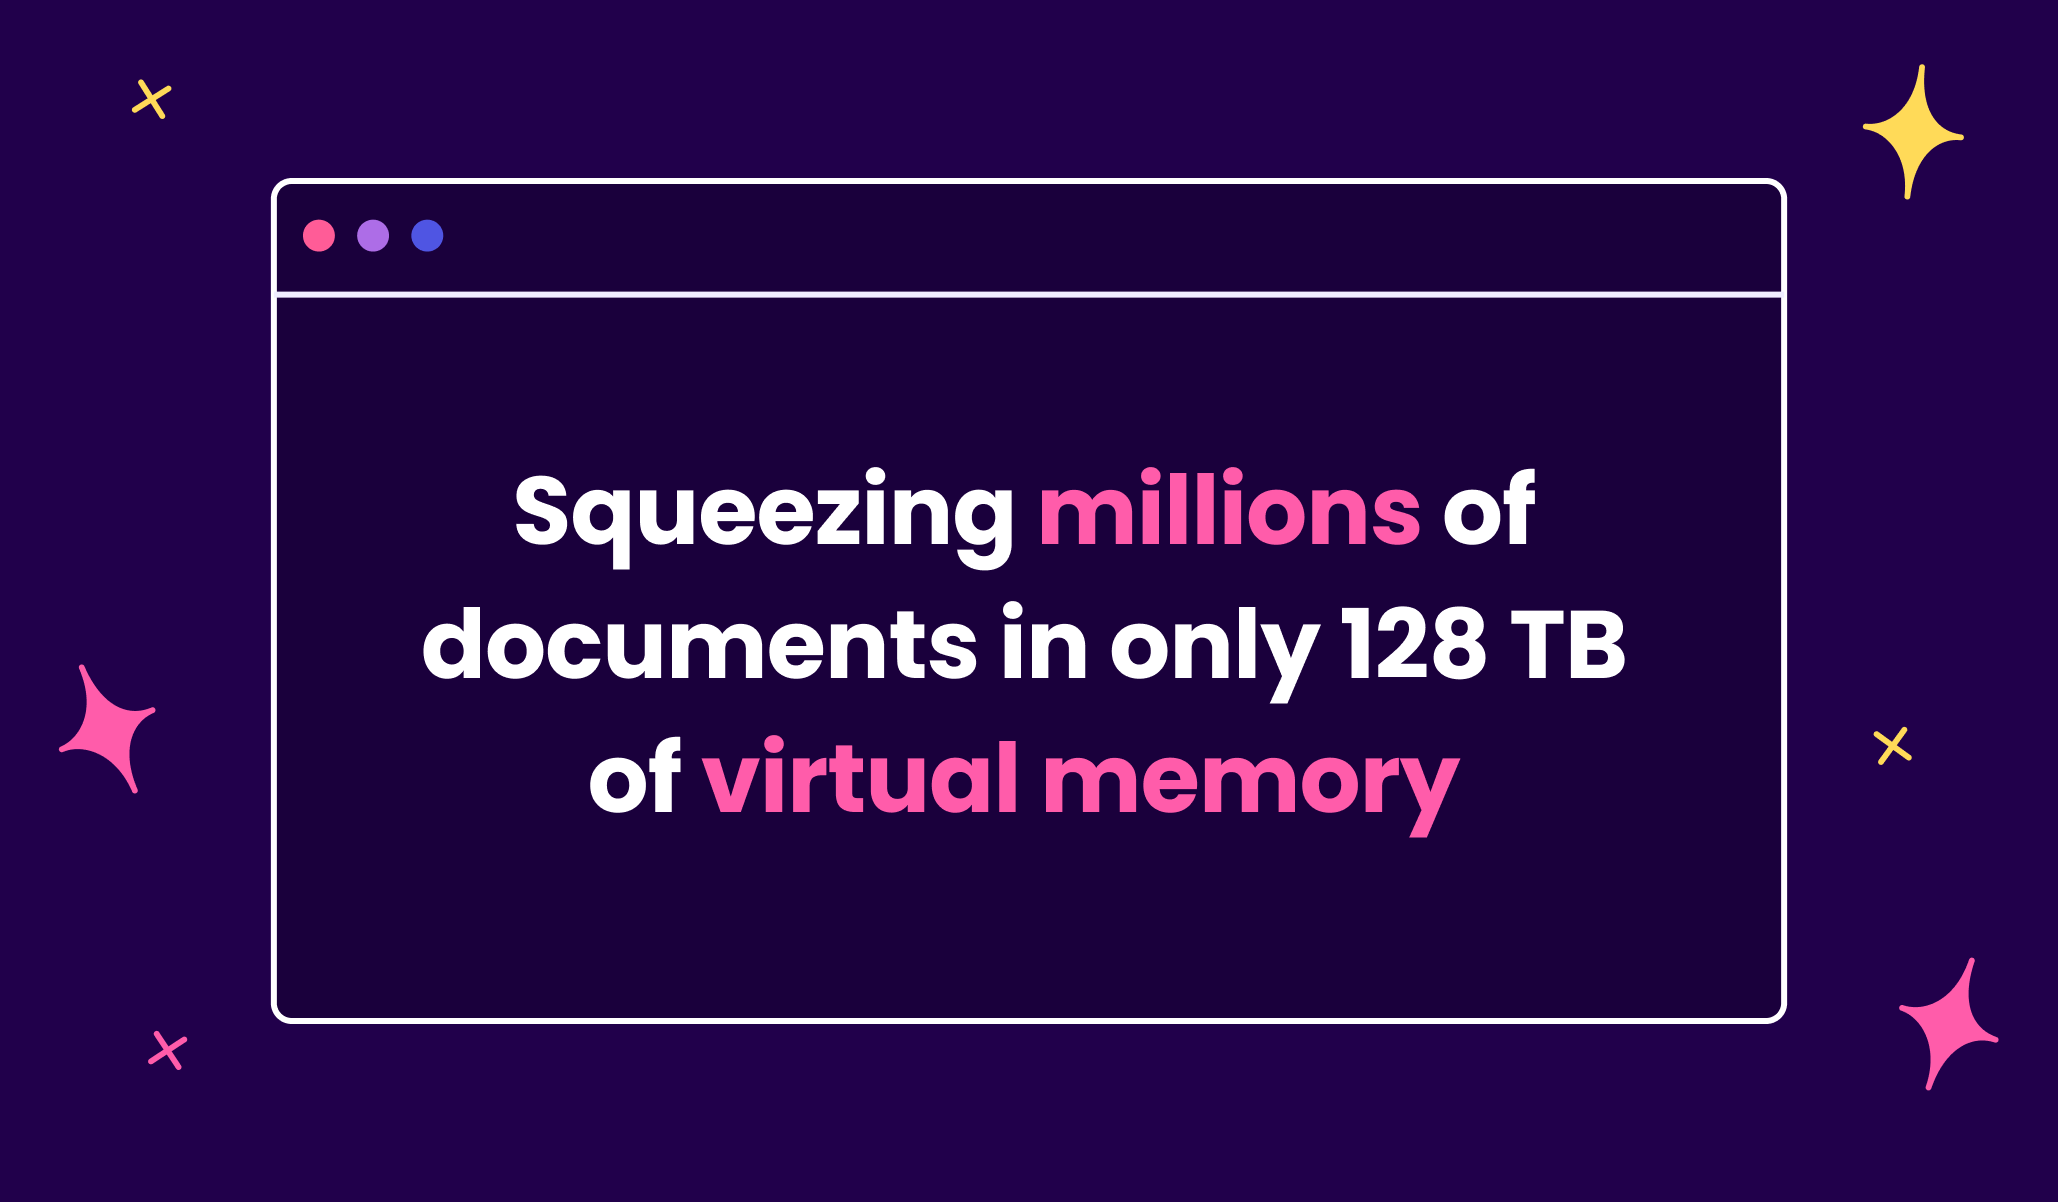 Squeezing millions of documents in only 128 TB of virtual memory